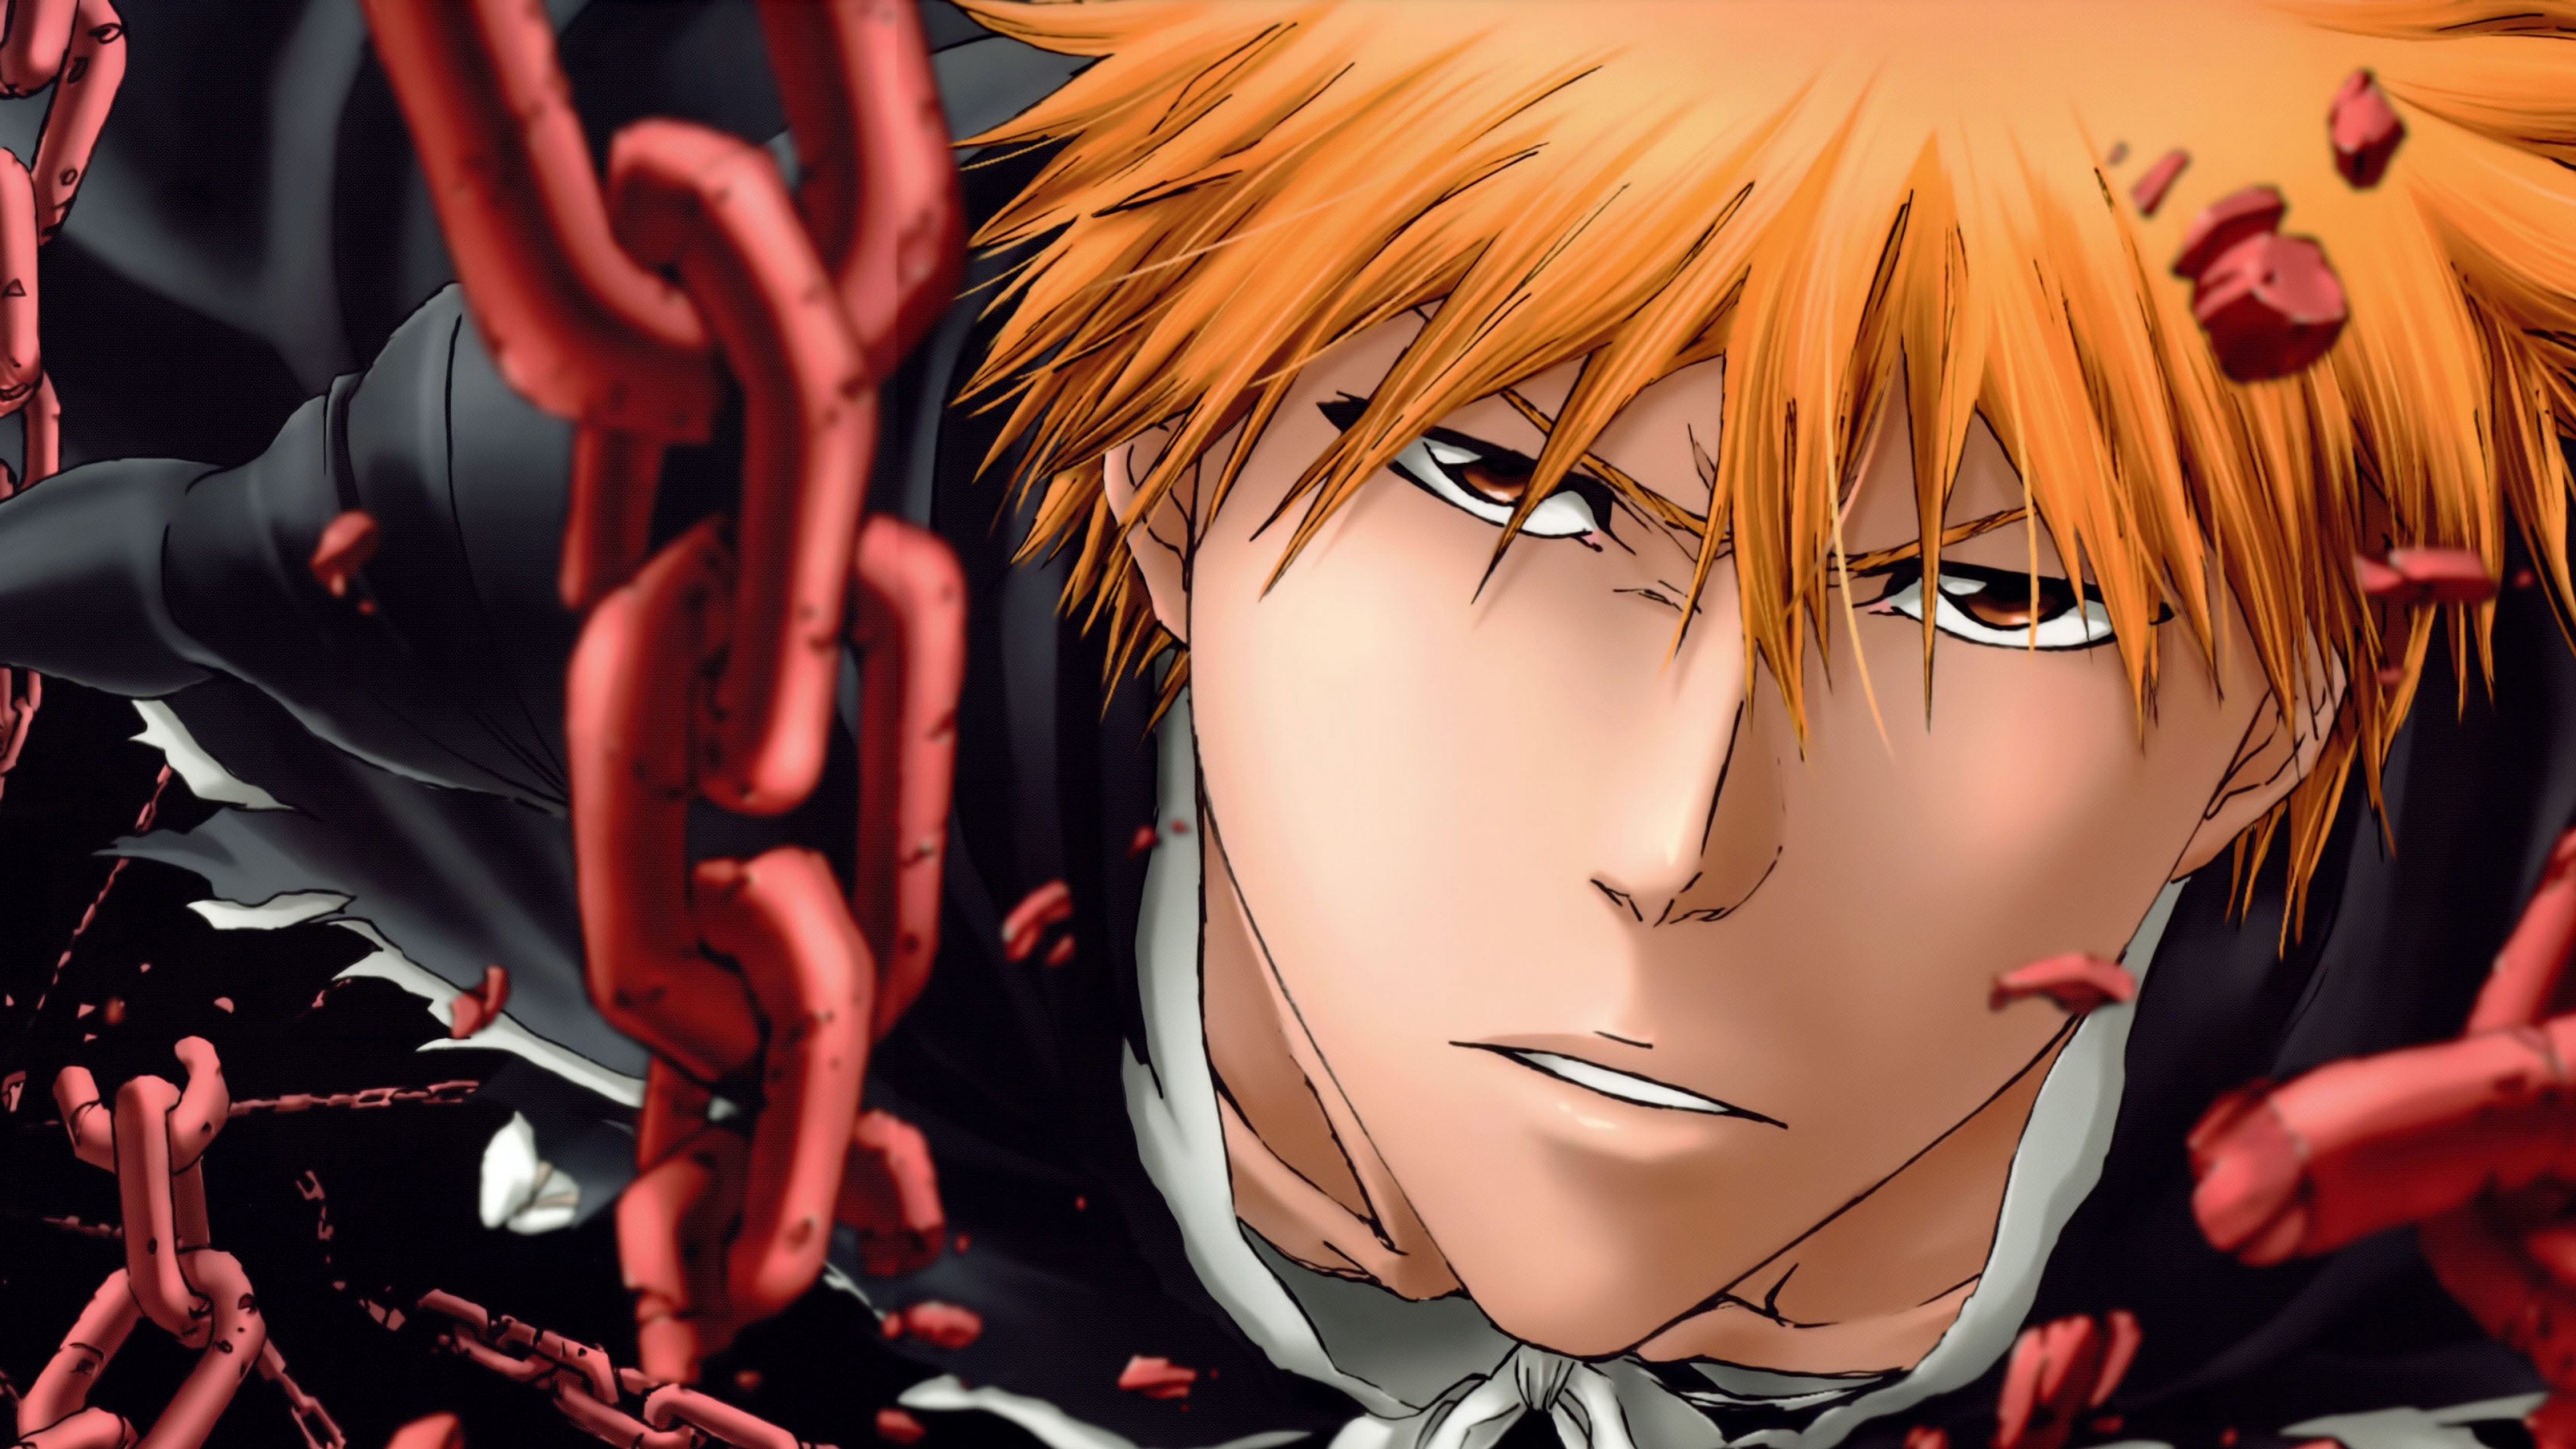 AnimeNerd - Well, is bleach anime returning?? 🙇‍♂️🙇‍♂️ . ⚡Looking forward  to Japan Jump Festa 👀👀 ⚡Atleast be hyped uptil that atleast I'm hyped to  see more bleach 🔥 . Follow us